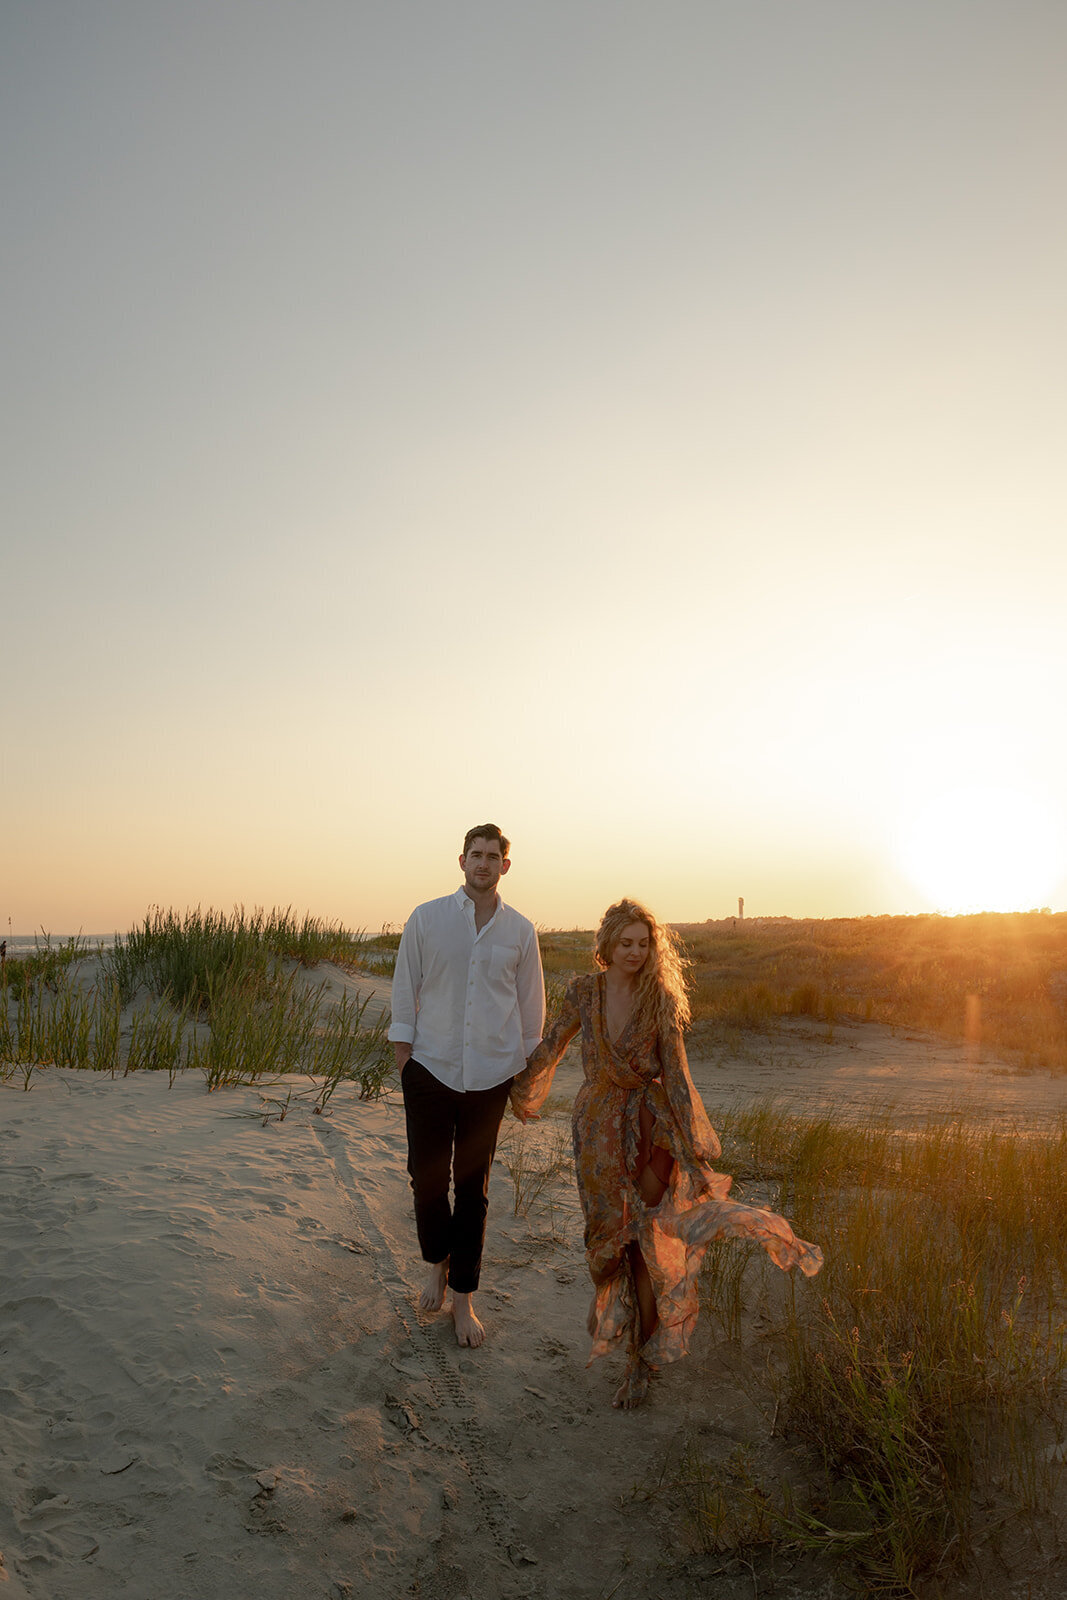 Couple is walking in sand dunes during Charleston beach engagement session. Sun is setting. Woman is wearing flowy dress perfectly blending in with warm color created by sunset.